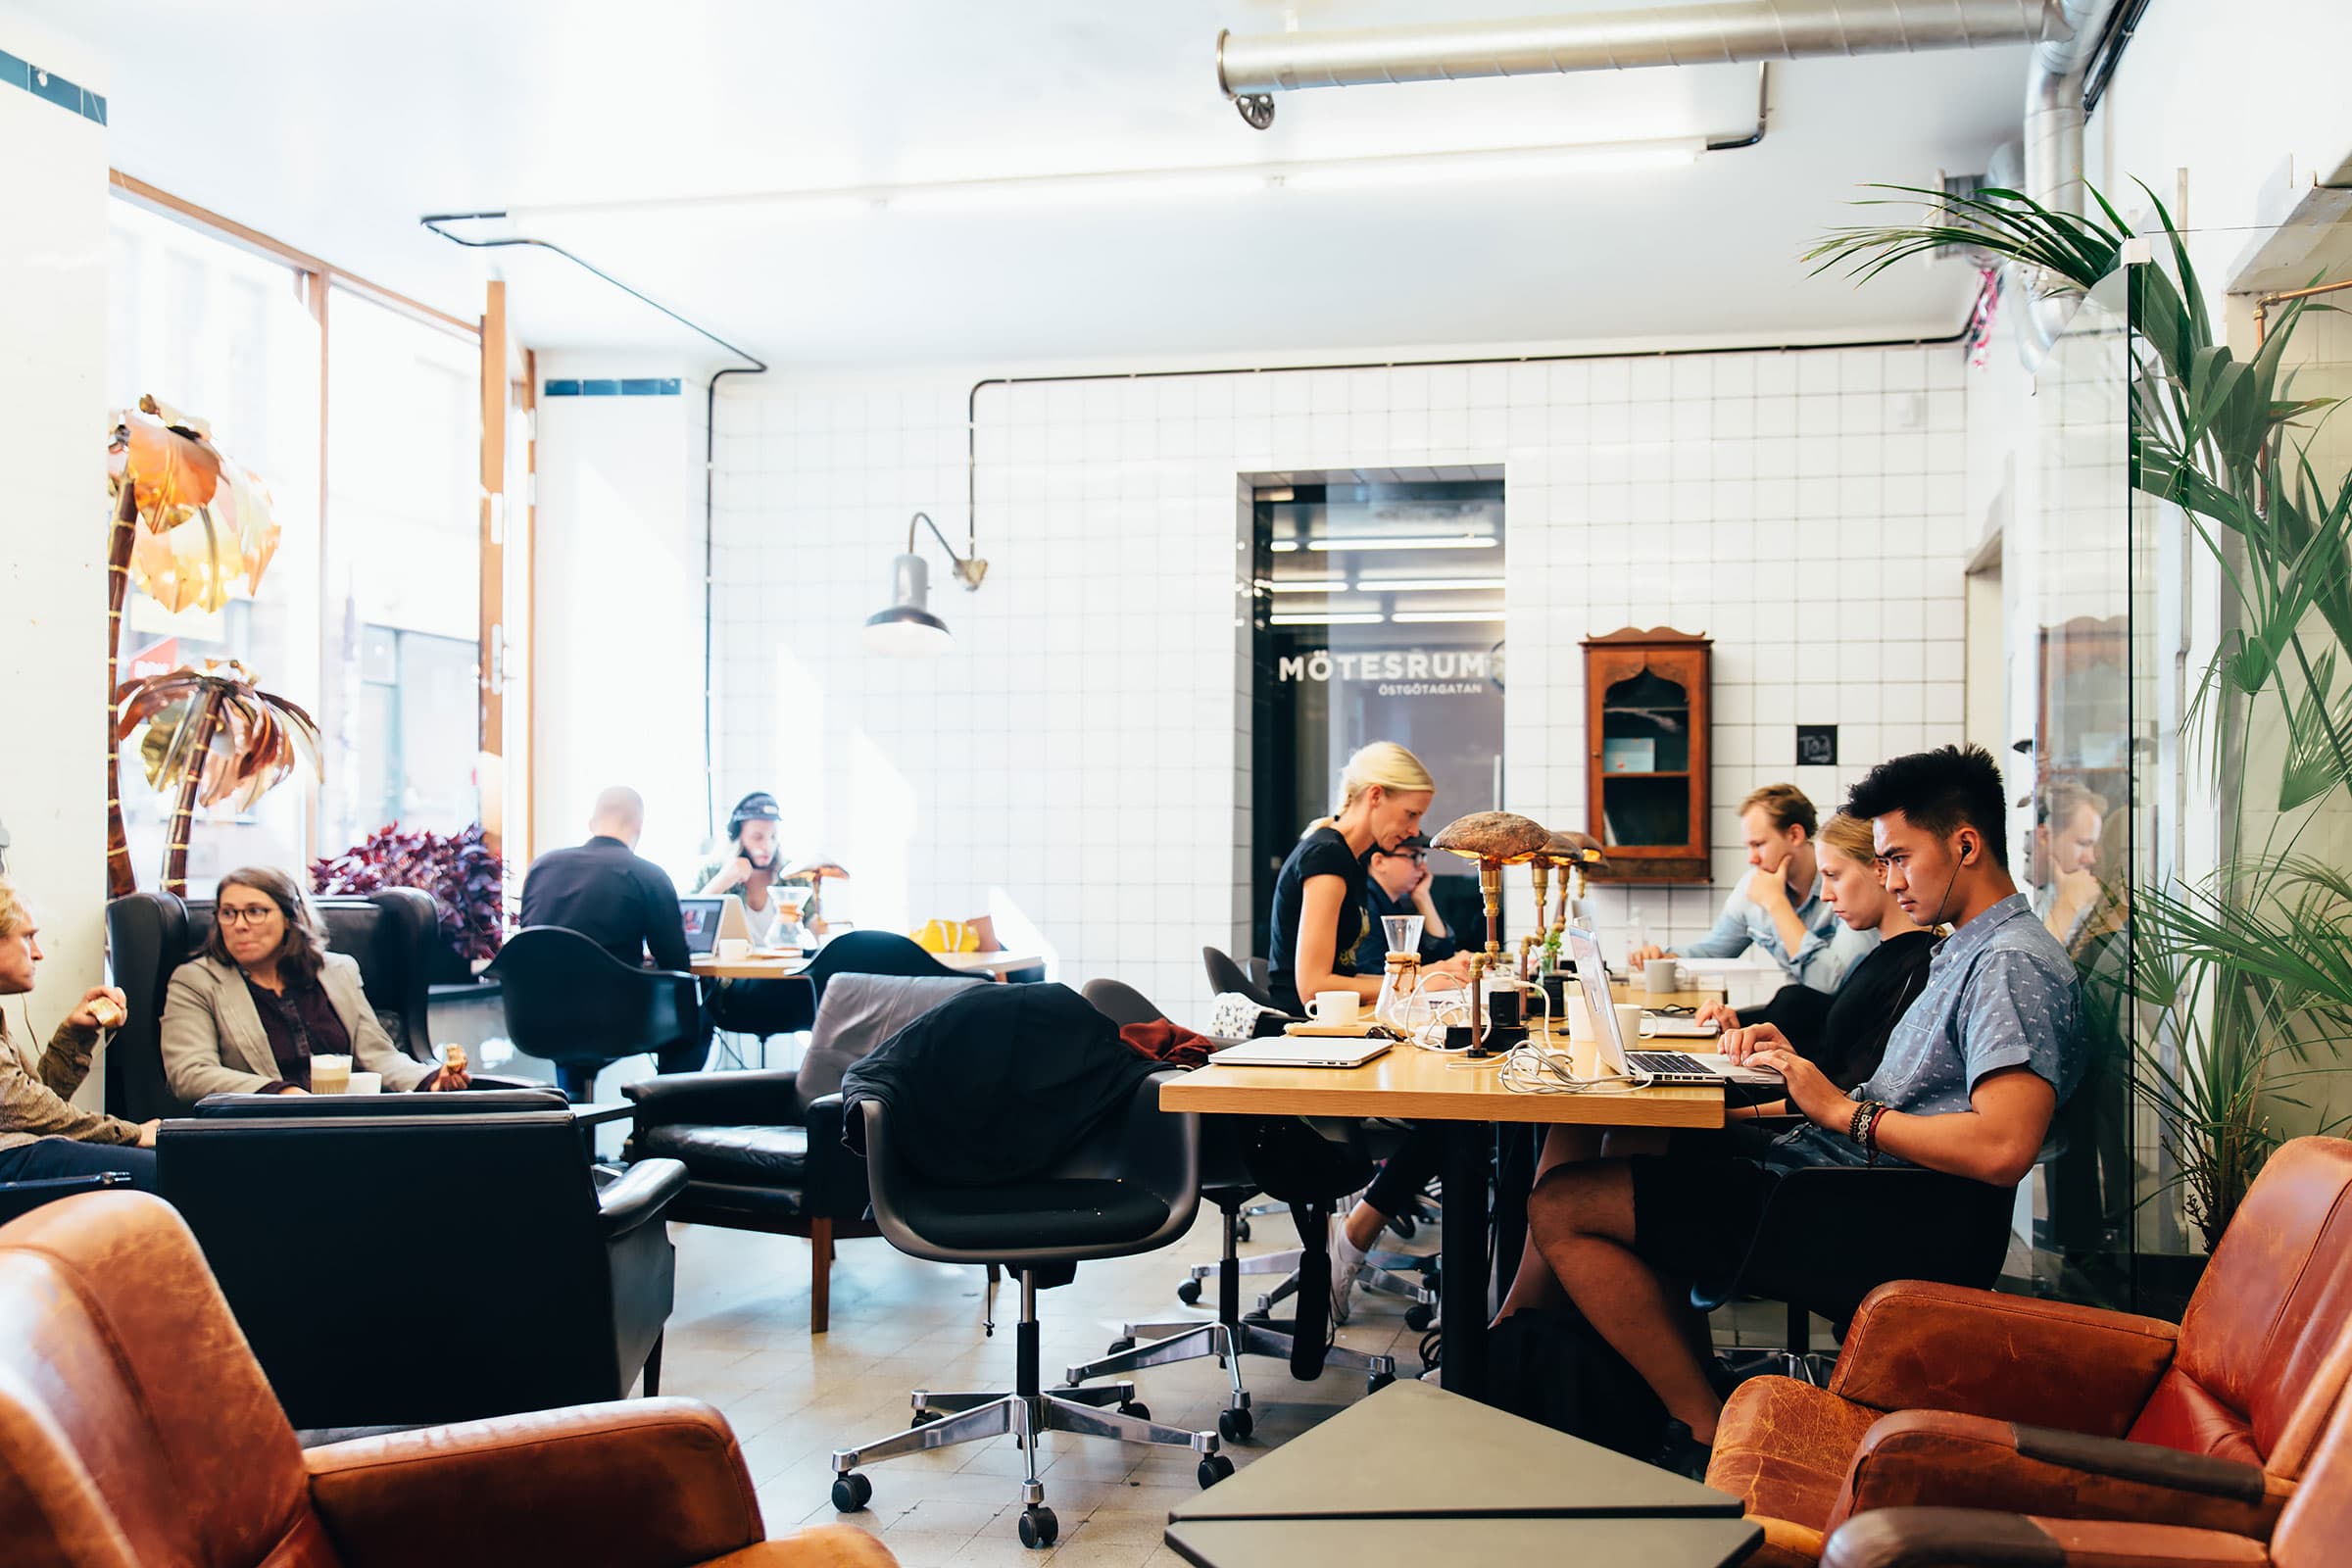 The guide to study and work-friendly caf&eacute;s in Gothenburg